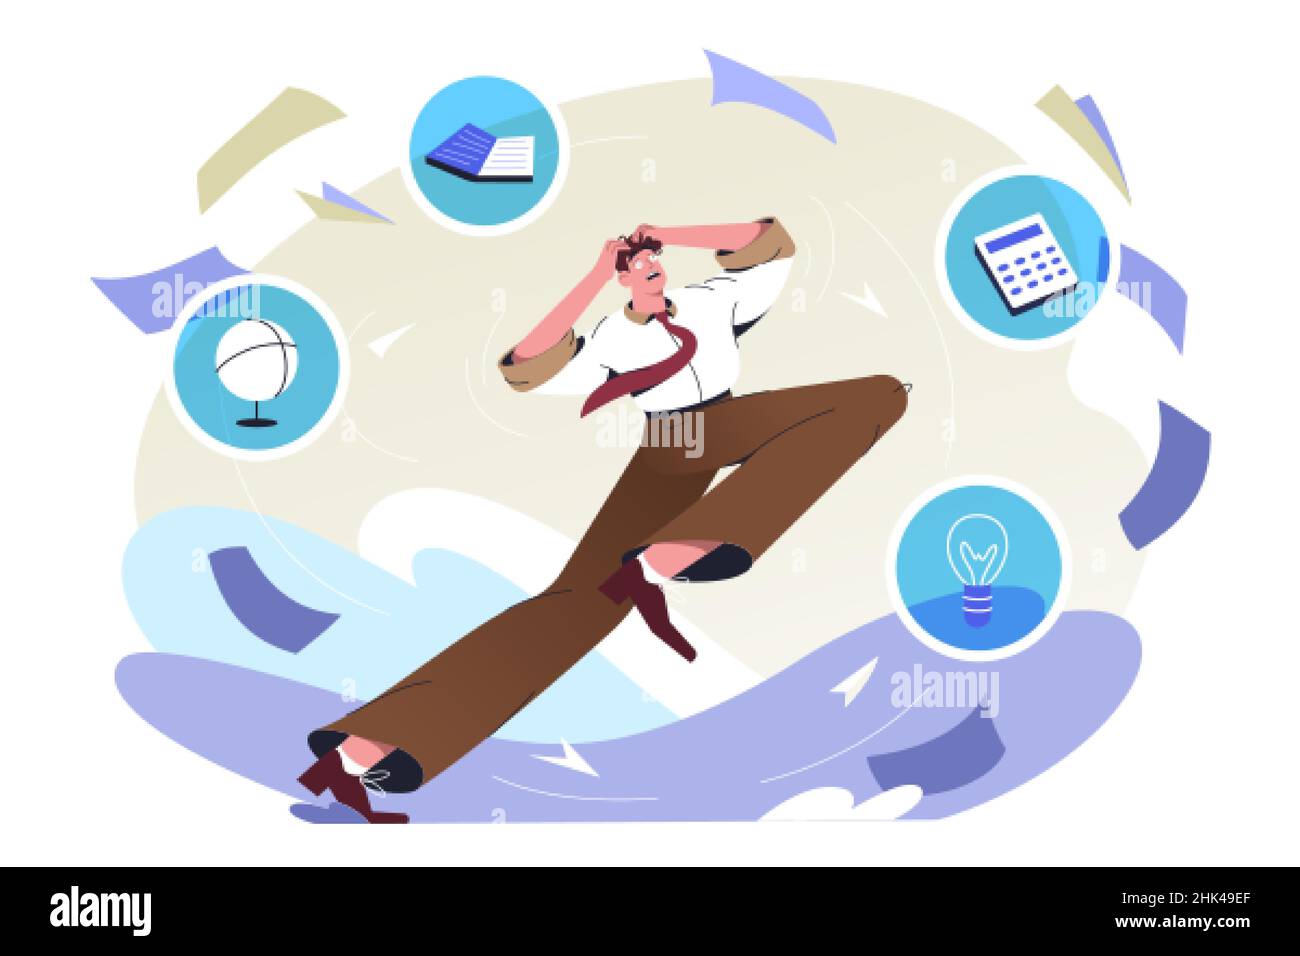 Flat stressed man overloaded by work and a lot of information. Overwhelmed employee person running away from overload. Multitasking and excess of paperwork for exhausted worker in office. Stock Vector